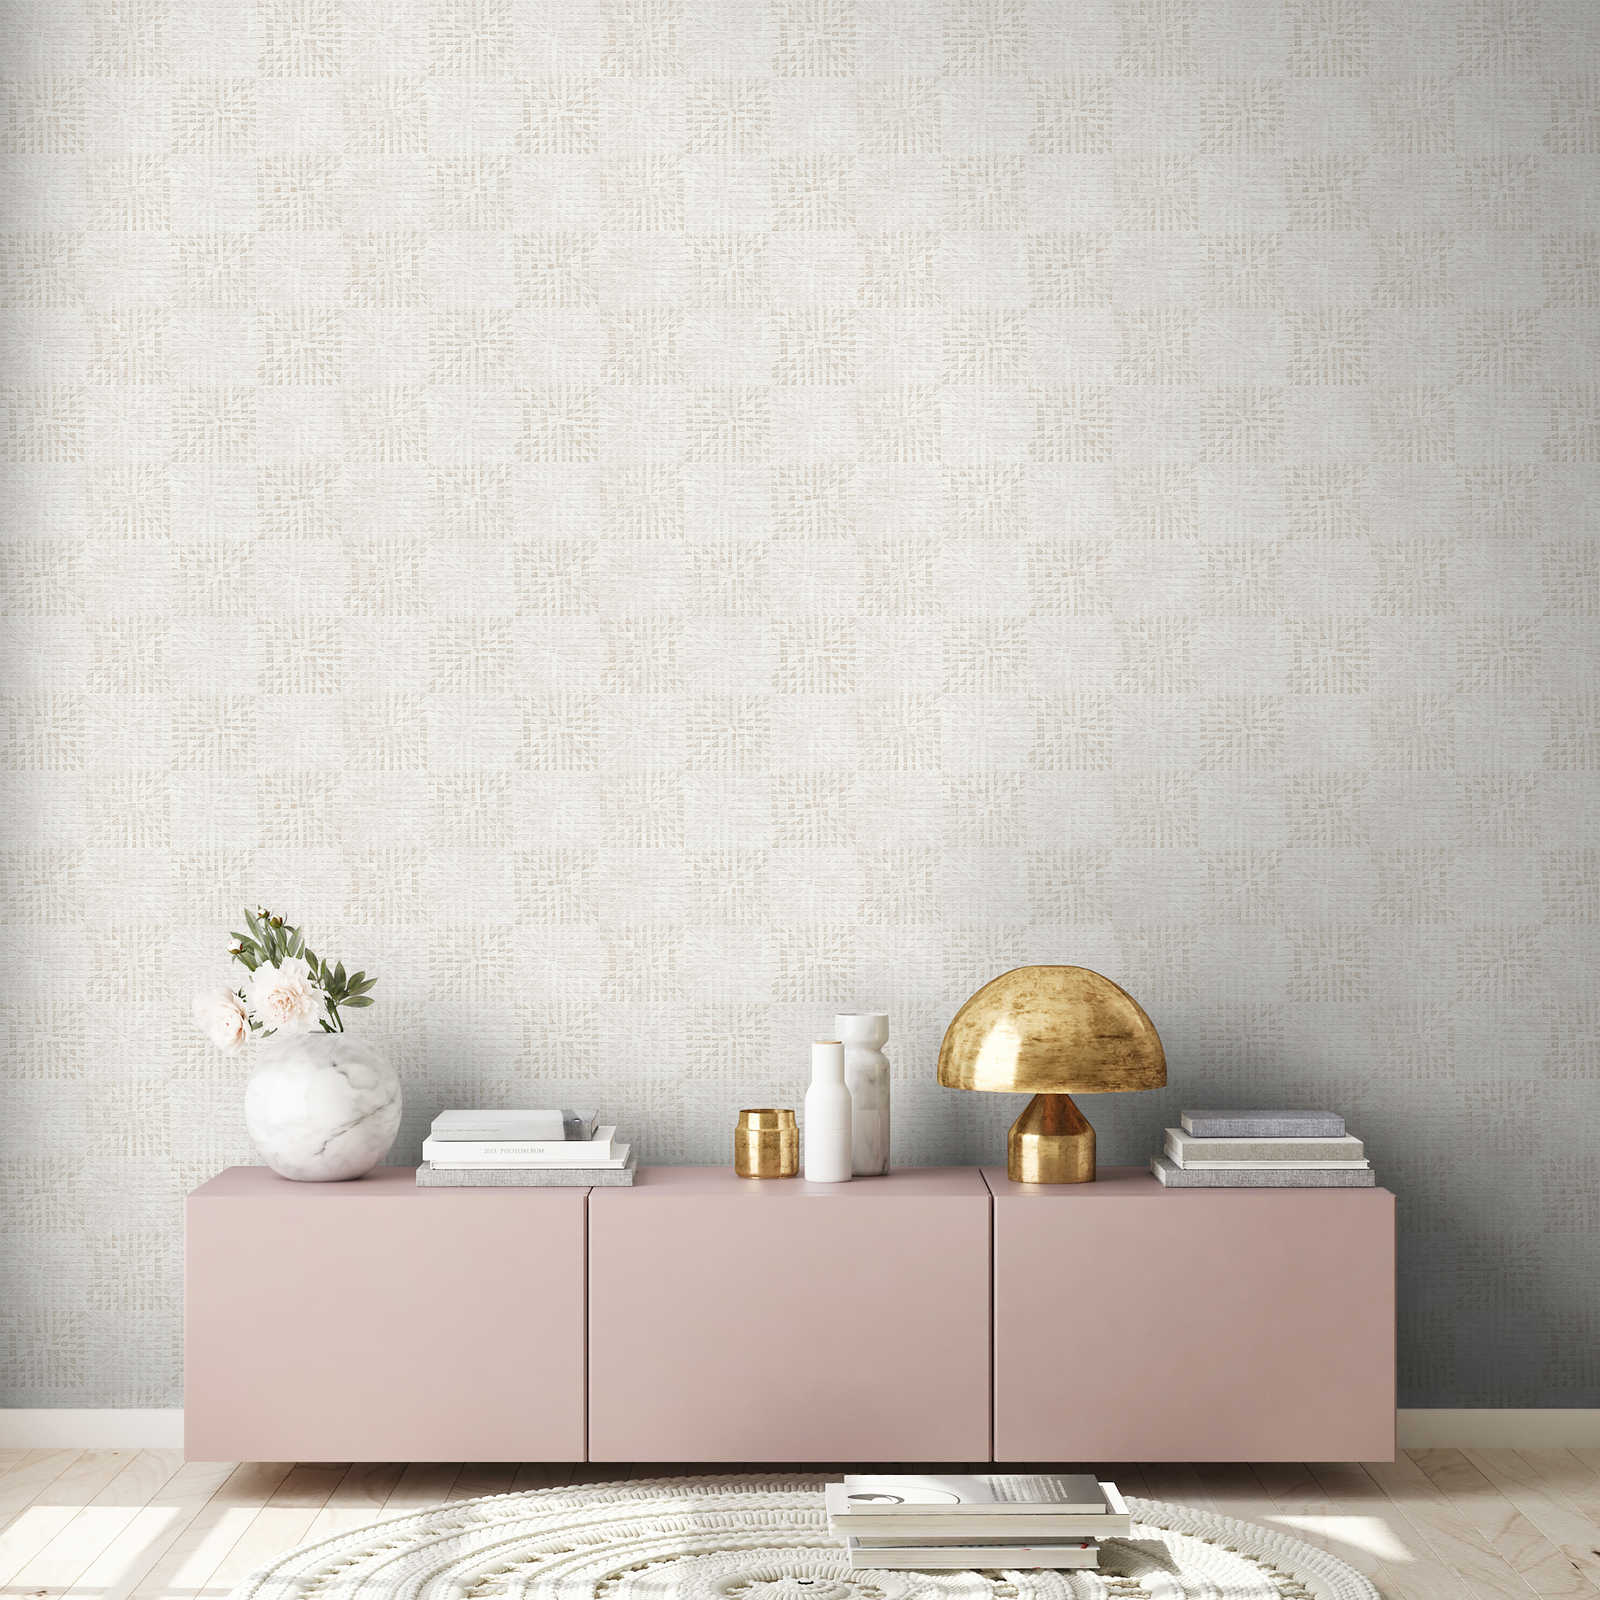             Ethno wallpaper with textured pattern & mosaic effect - cream
        